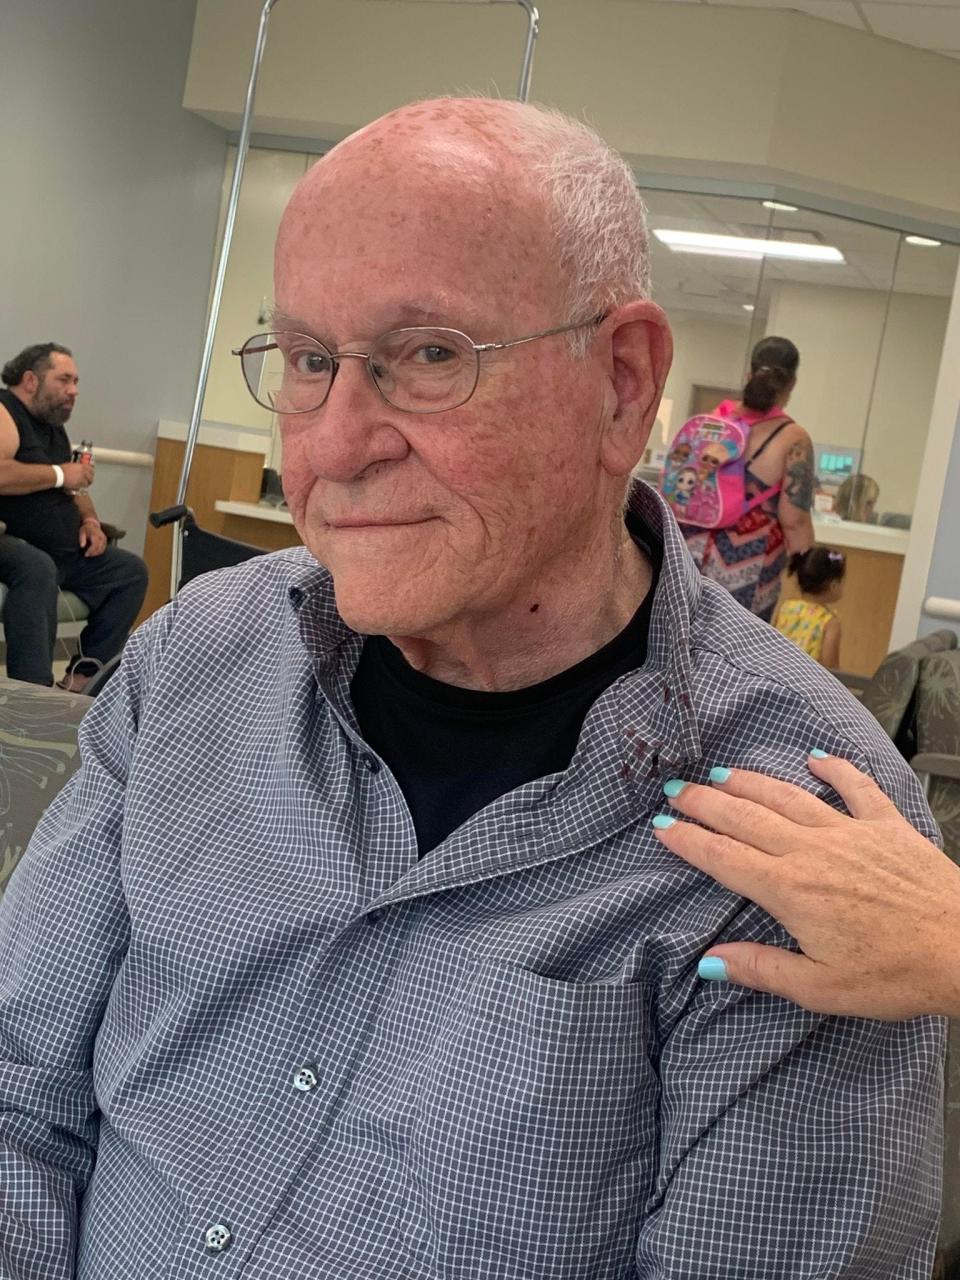 John Ridge, 83, sits in the waiting room before receiving care for a pointed pellet wound. While the pellet was lodged in his neck, it only left a small red mark.